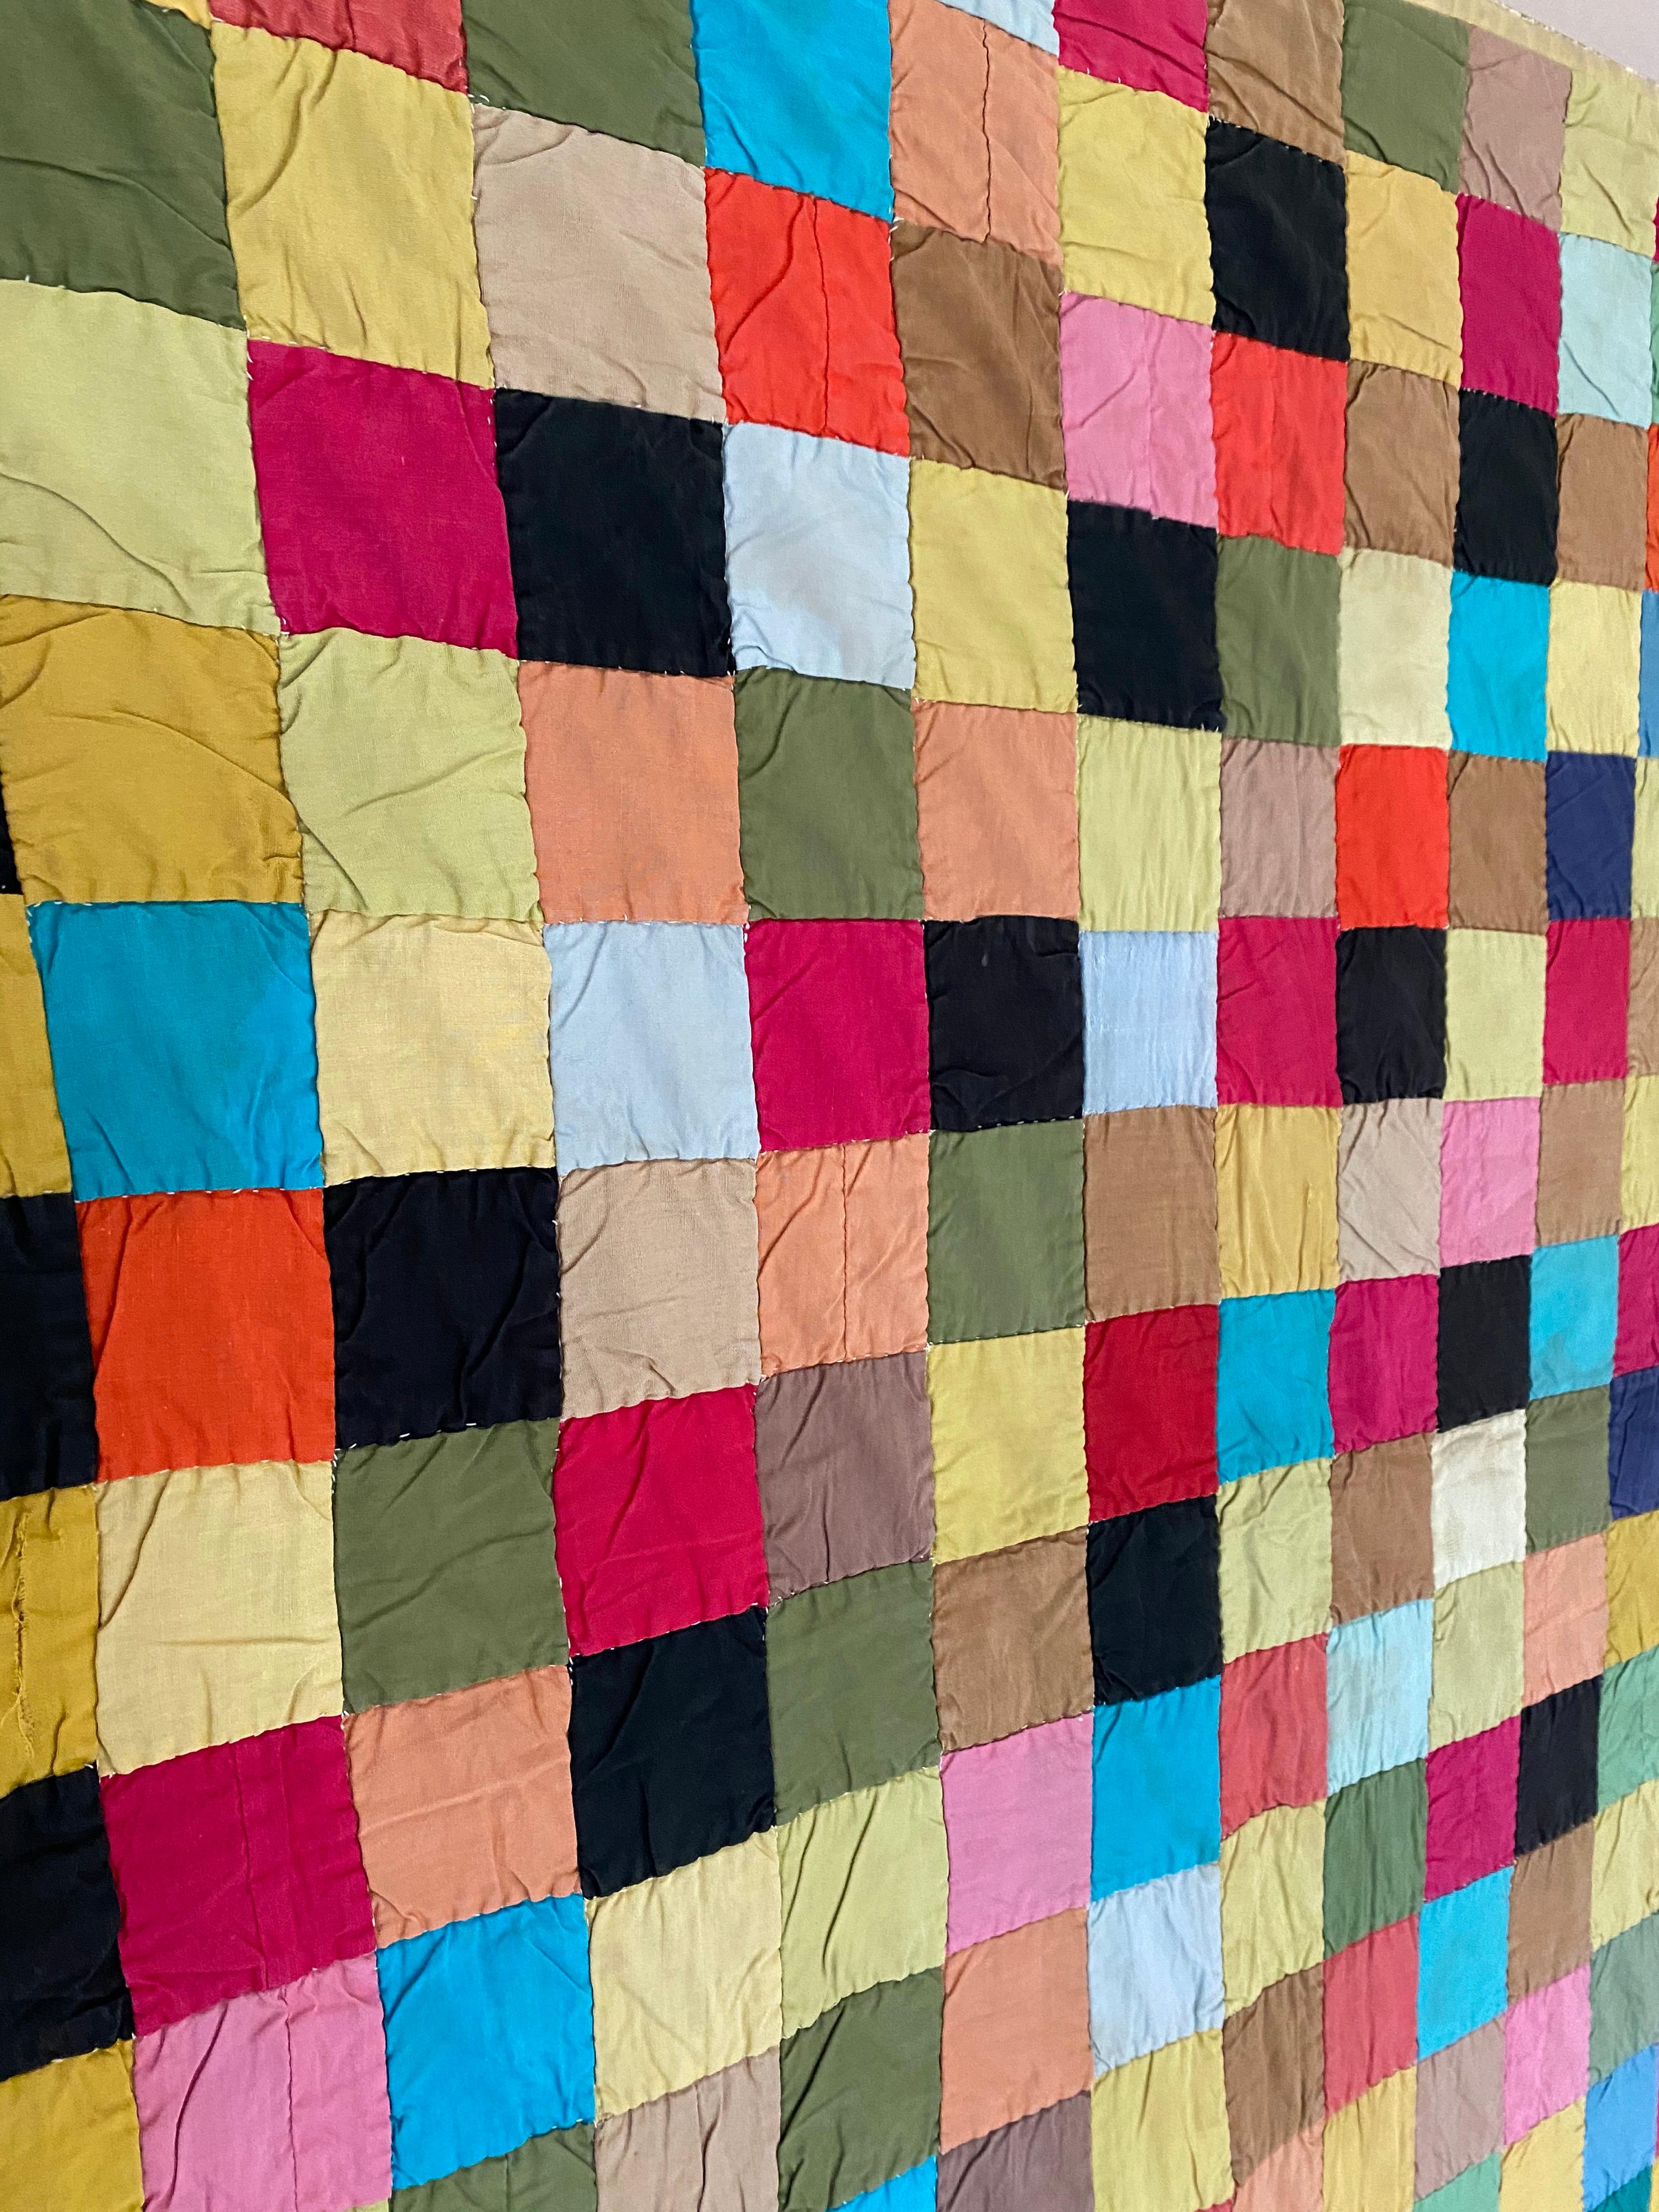 An early 20th century pieces square patchwork quilt. Consisting of multi colored pieced squares. Pennsylvania, early 1900s.